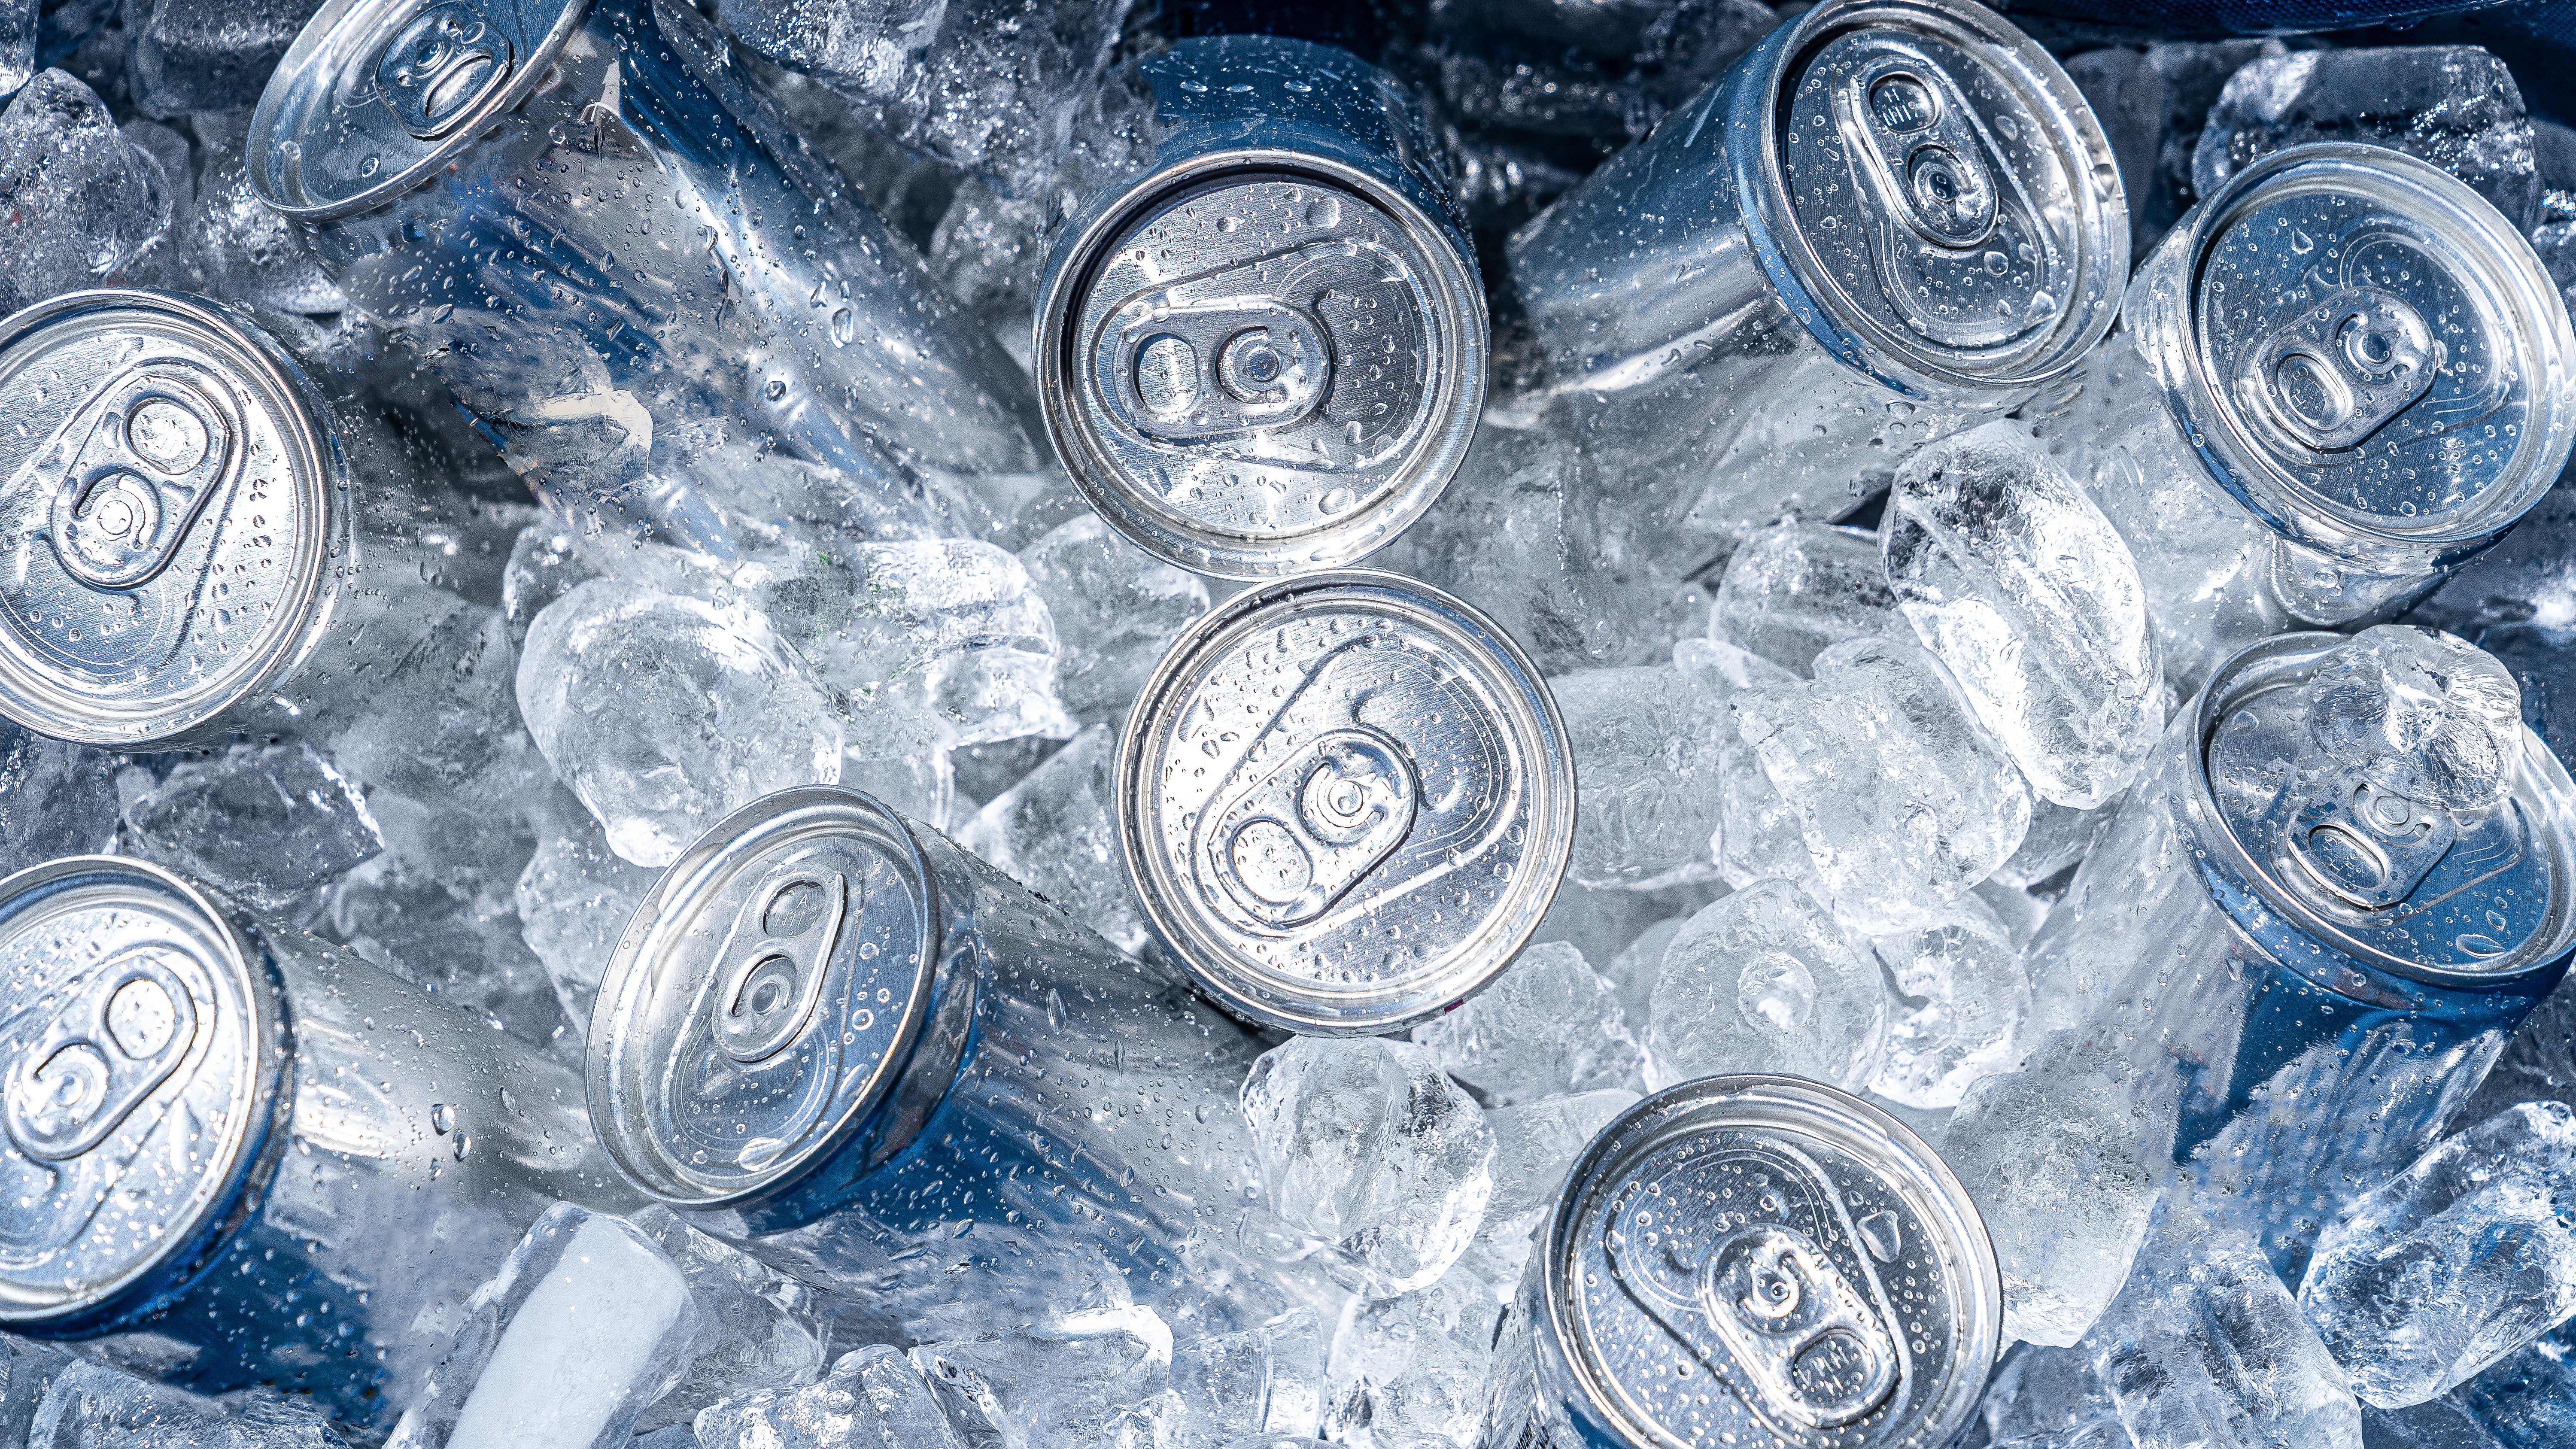 Cans on ice.